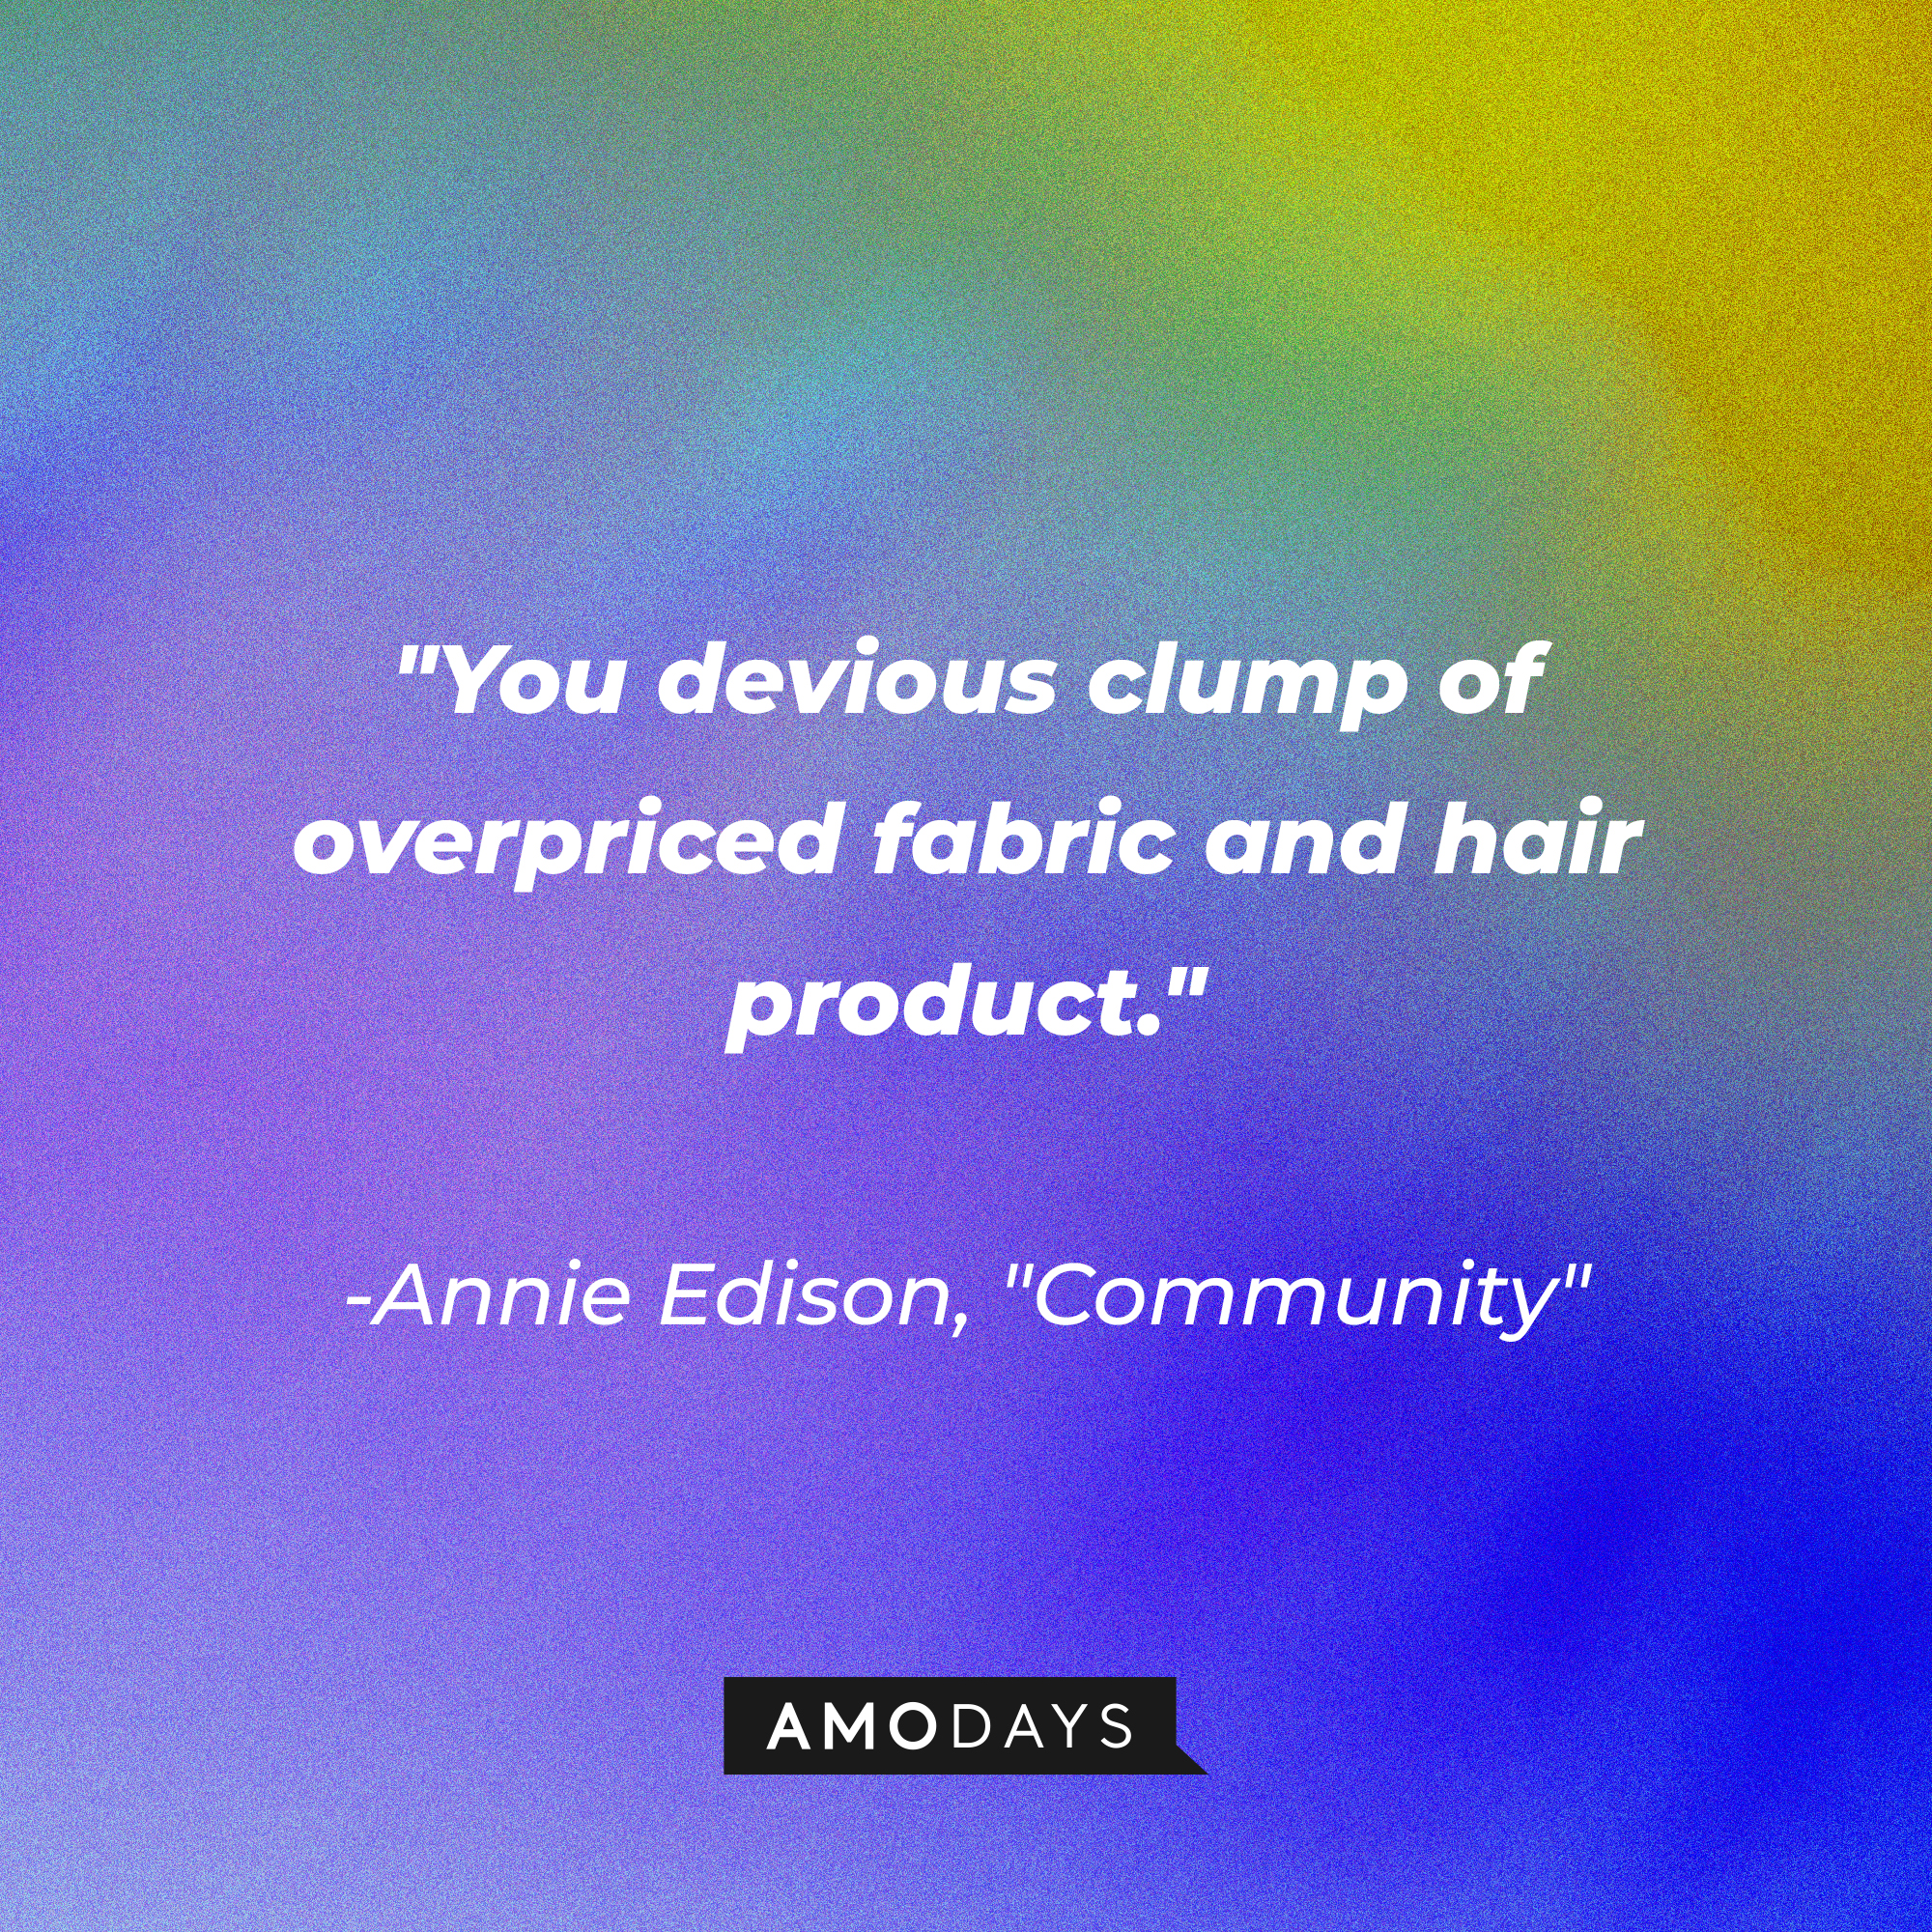 Annie Edison's quote: "You devious clump of overpriced fabric and hair product." | Source: Amodays